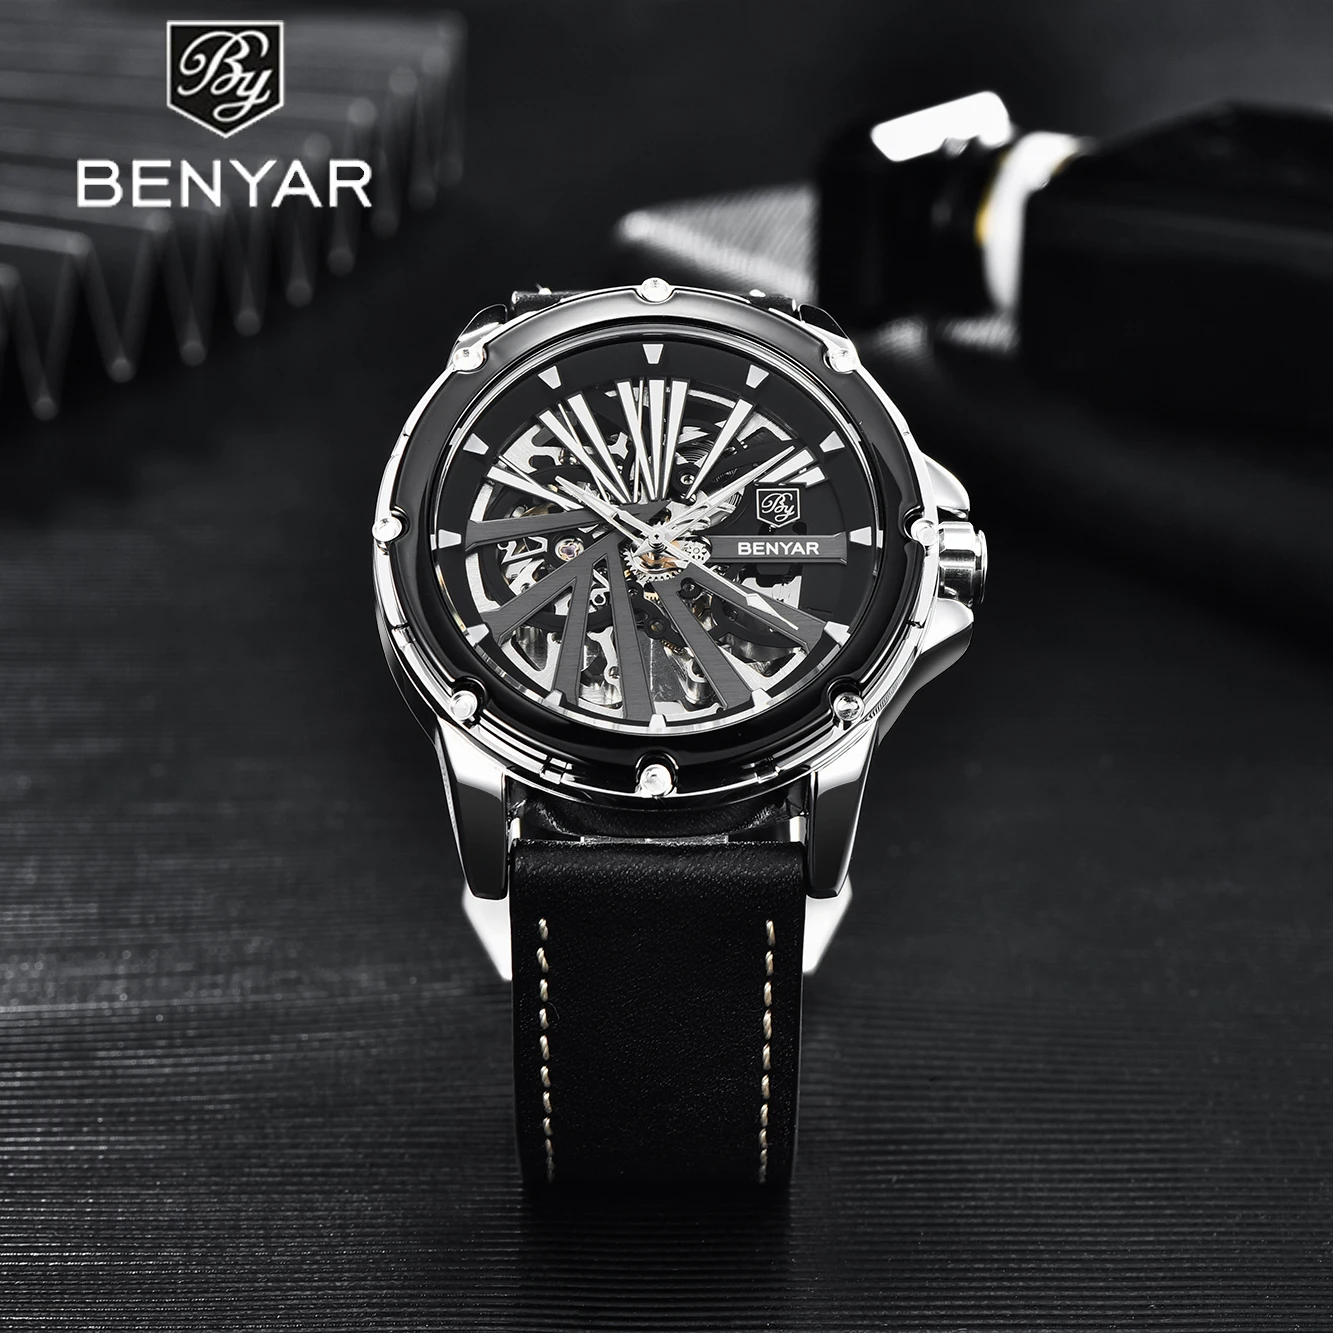 2021 Benyar New Simple Fashion Men's Automatic Mechanical Watch Waterproof High Quality Leather Night Light Watches Reloj Hombre